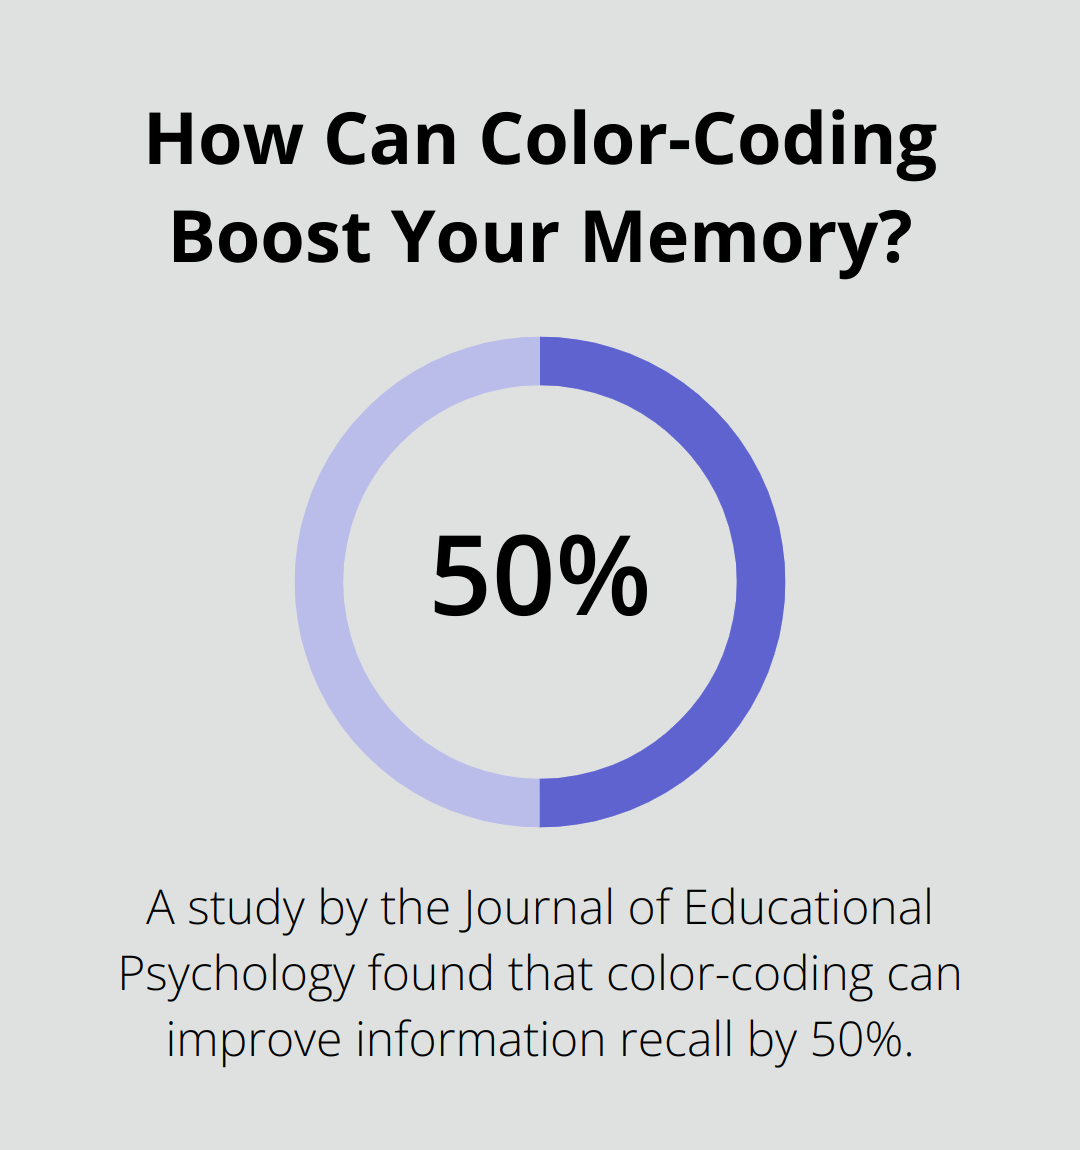 How Can Color-Coding Boost Your Memory?